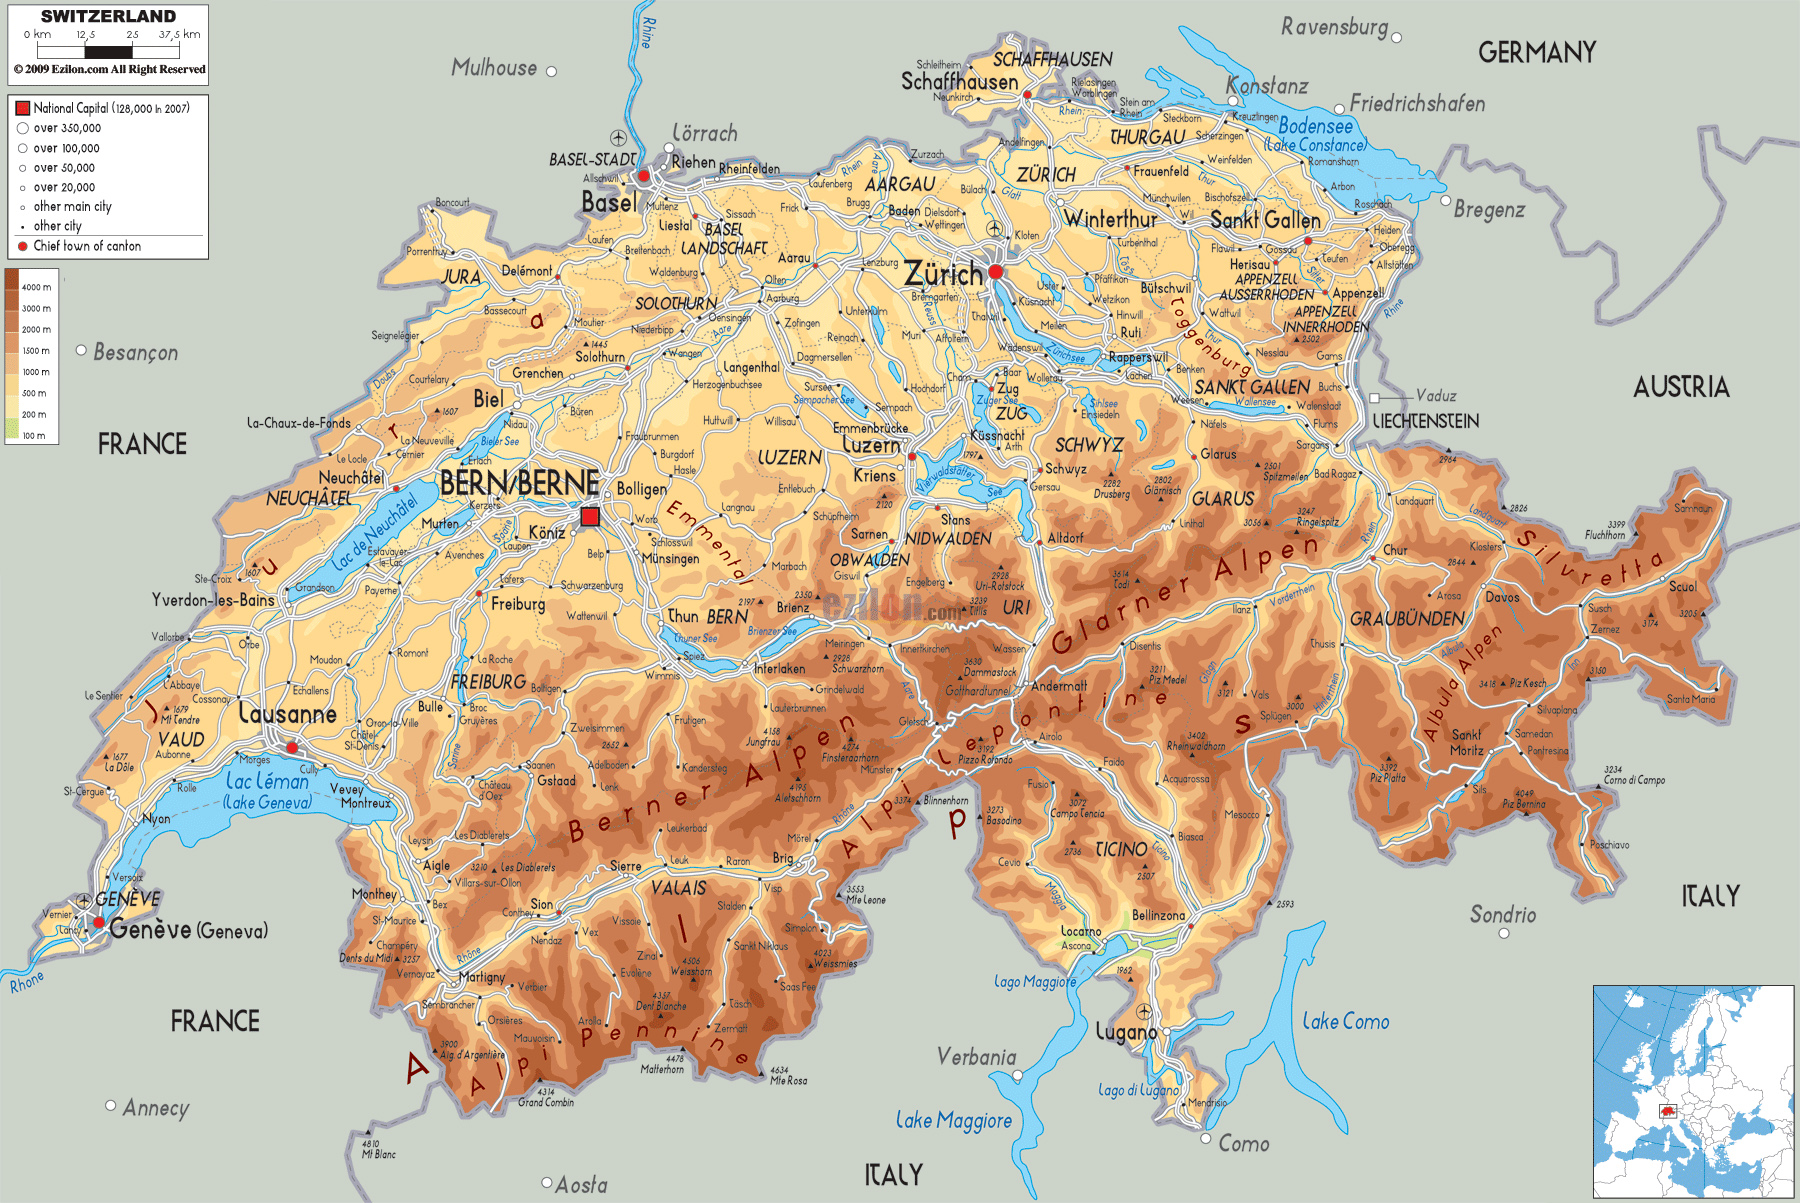 maps-of-switzerland-detailed-map-of-switzerland-in-english-tourist-map-of-switzerland-road